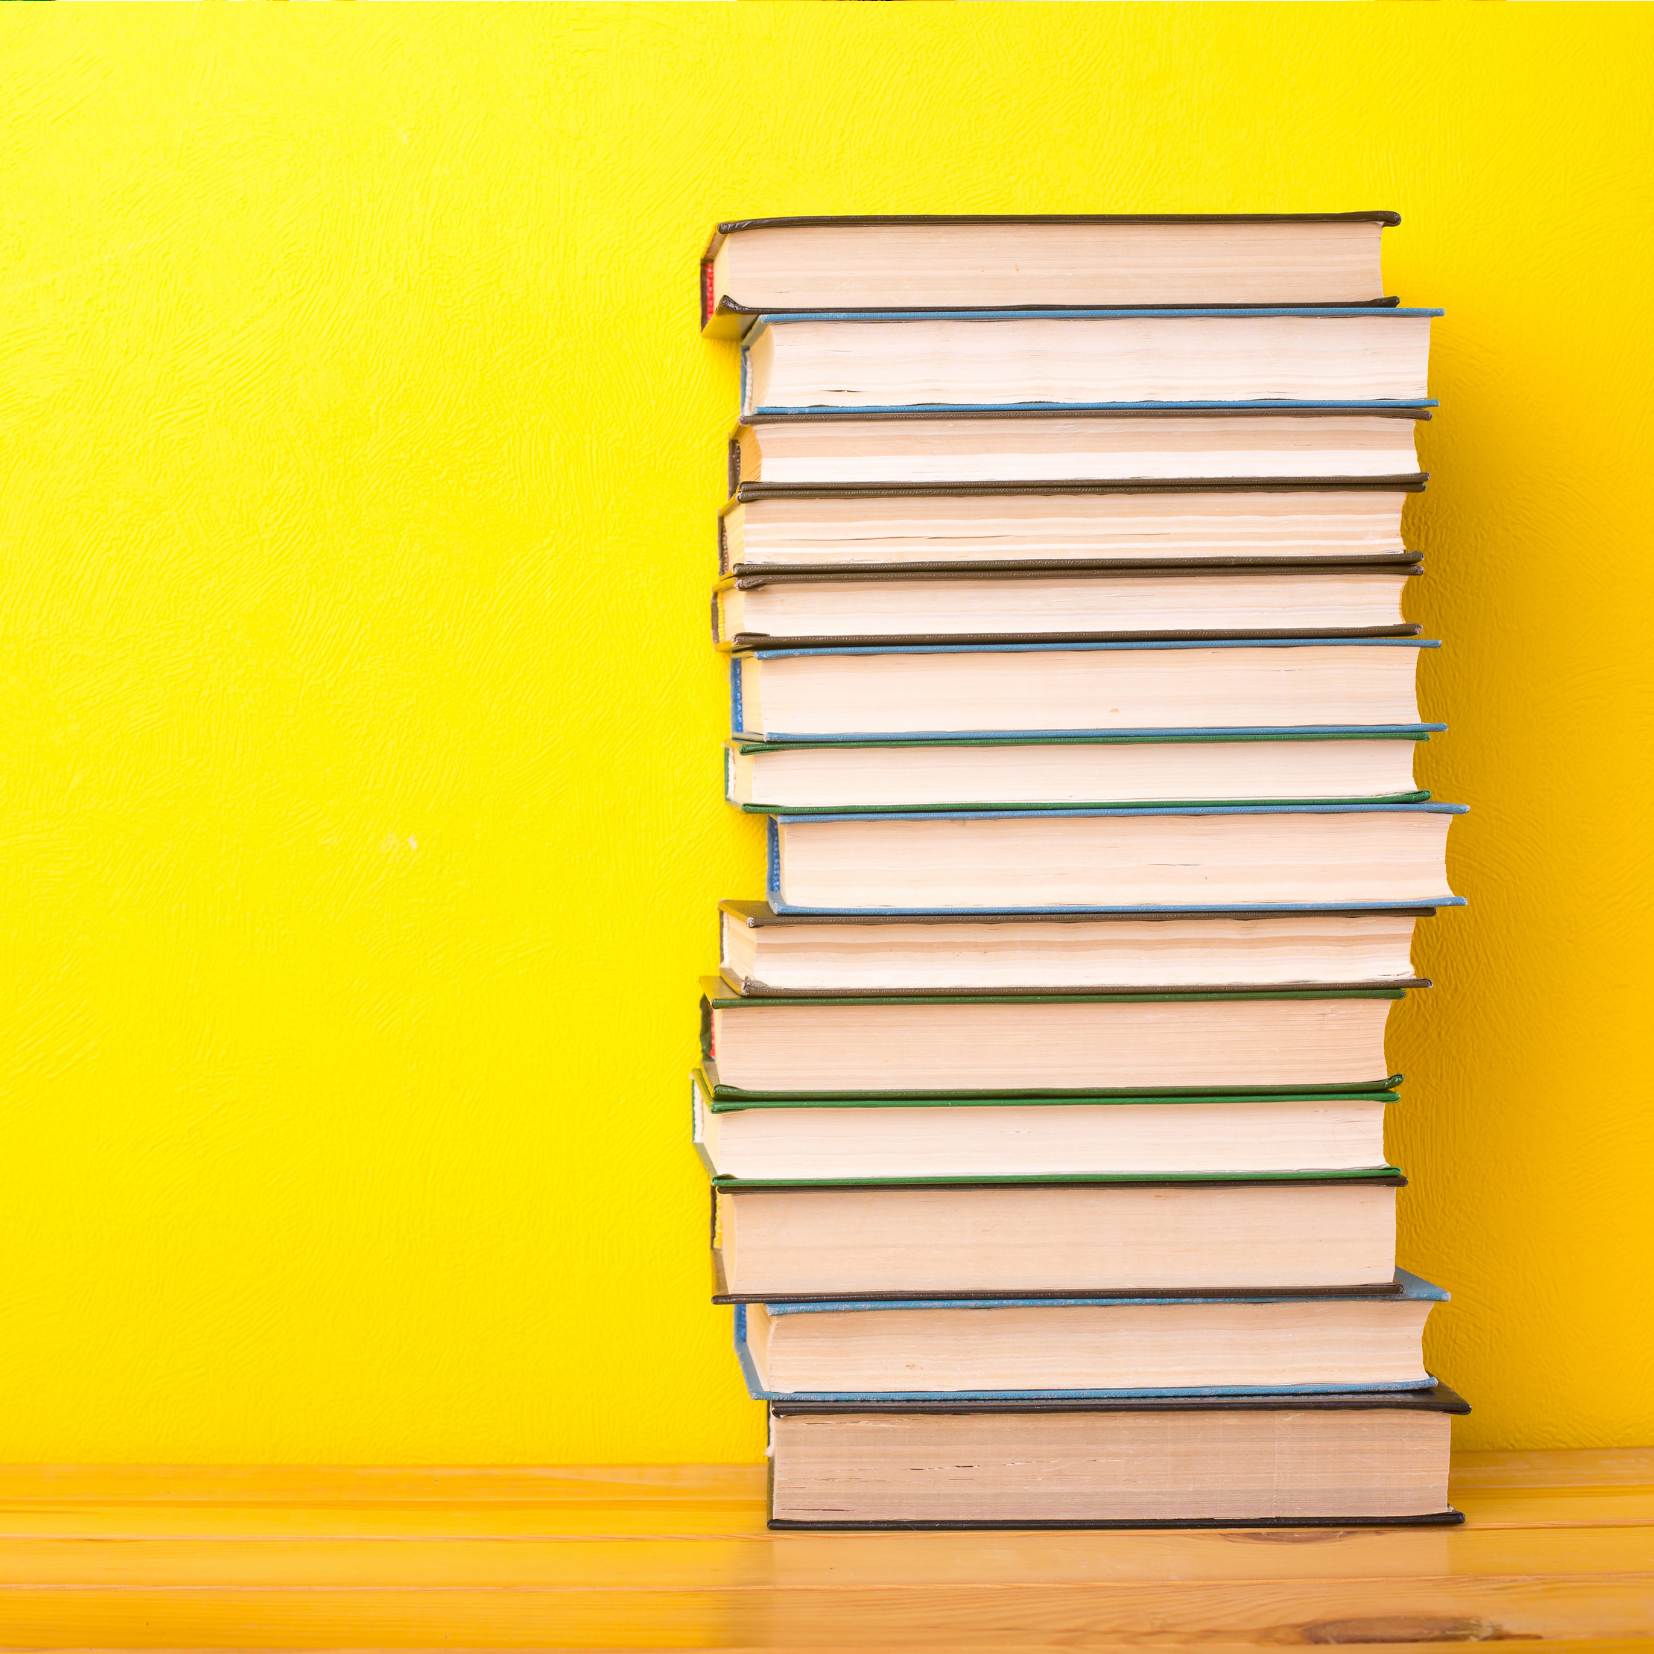 Stack of books on yellow background depicting Consulting